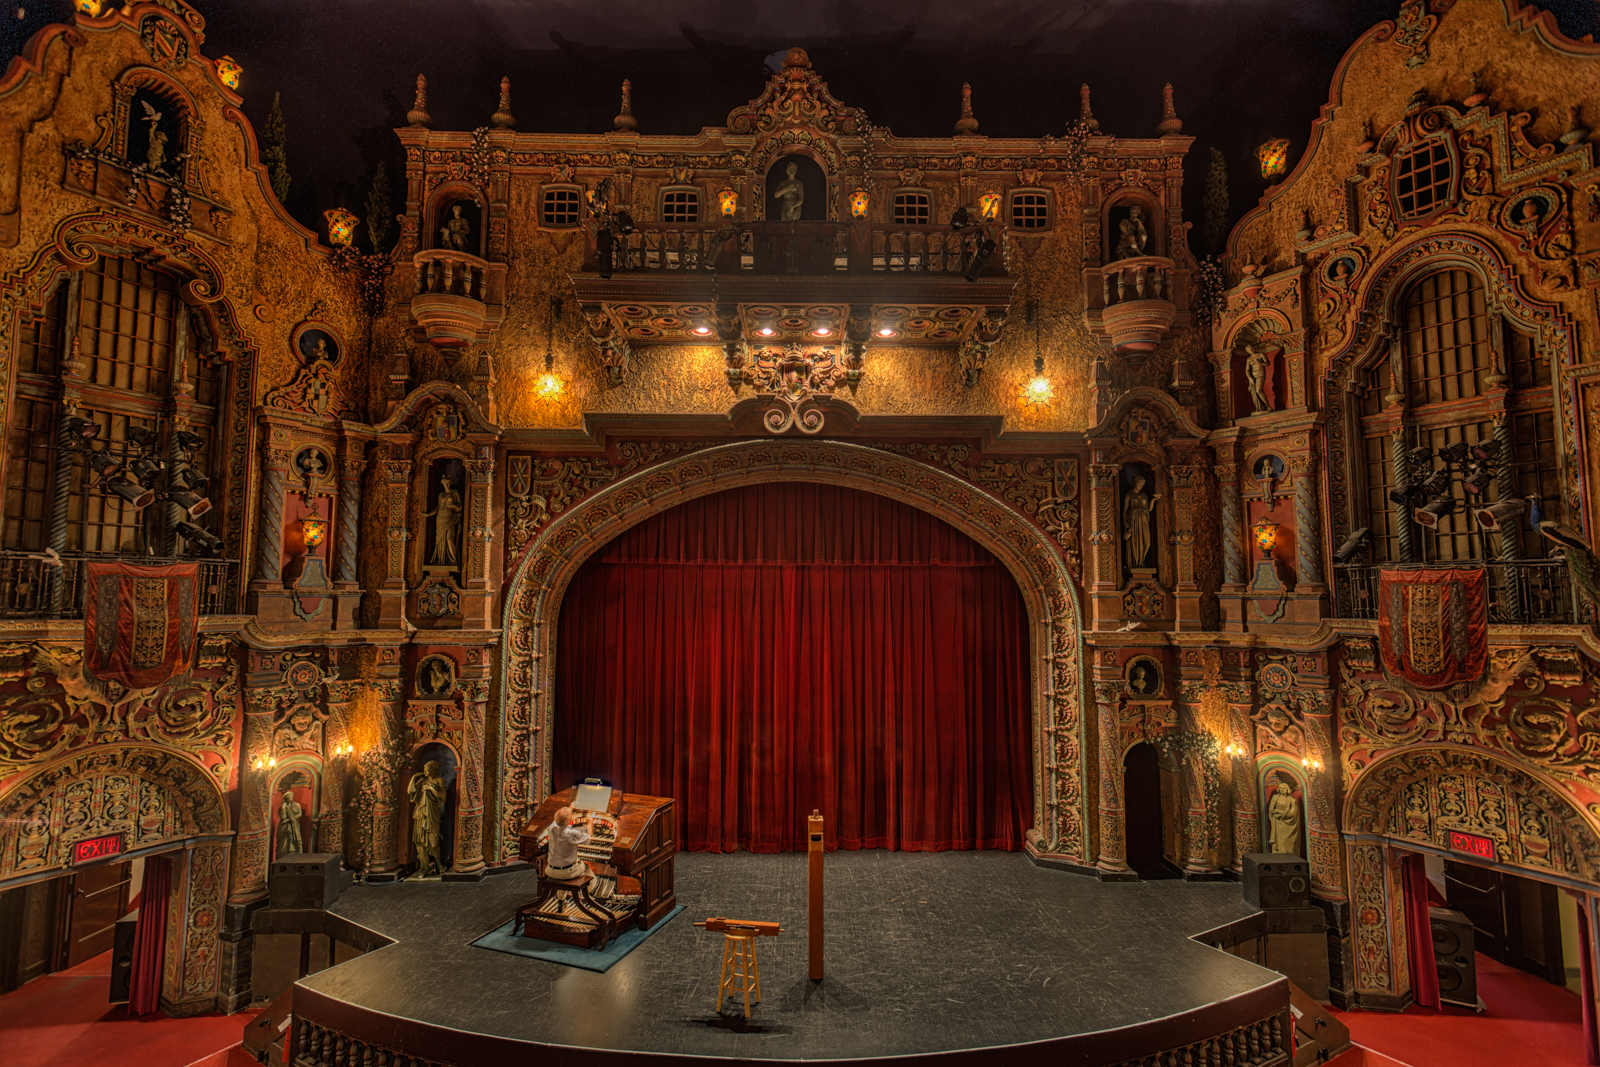 Tampa Theater Stage with Organist